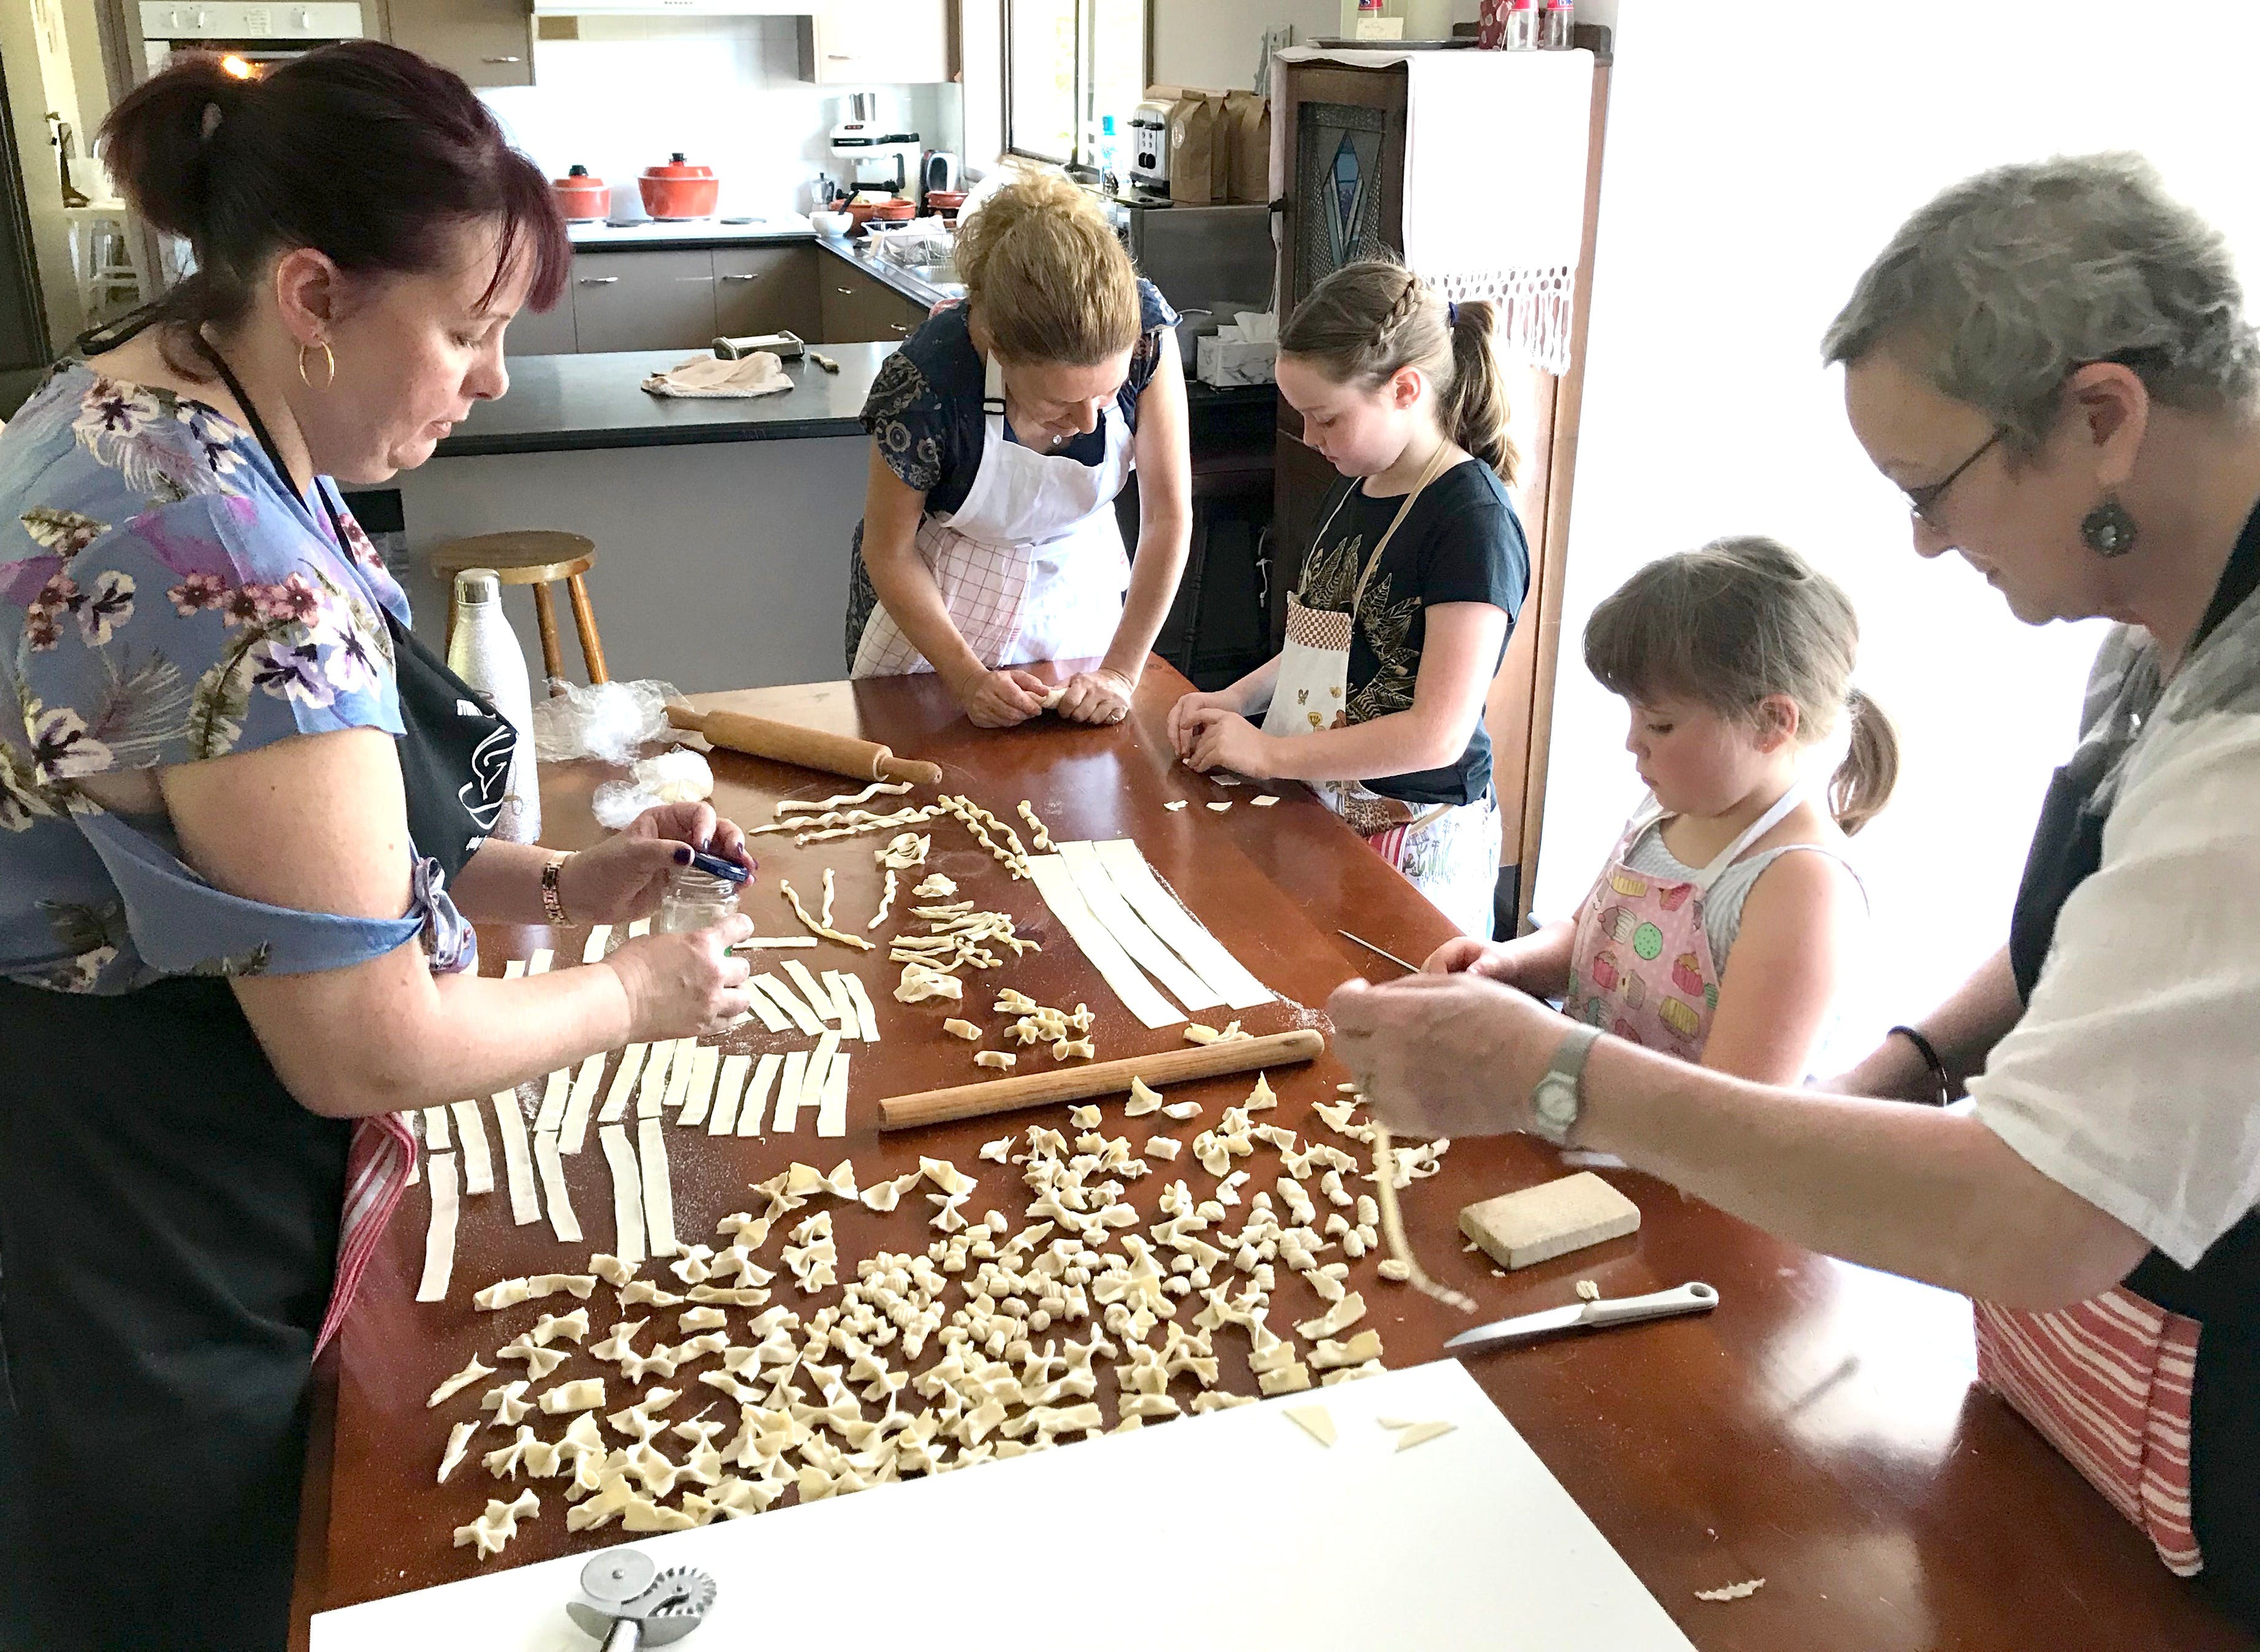 Kids Pasta Making Class - hands on fun at your house - WA Accommodation